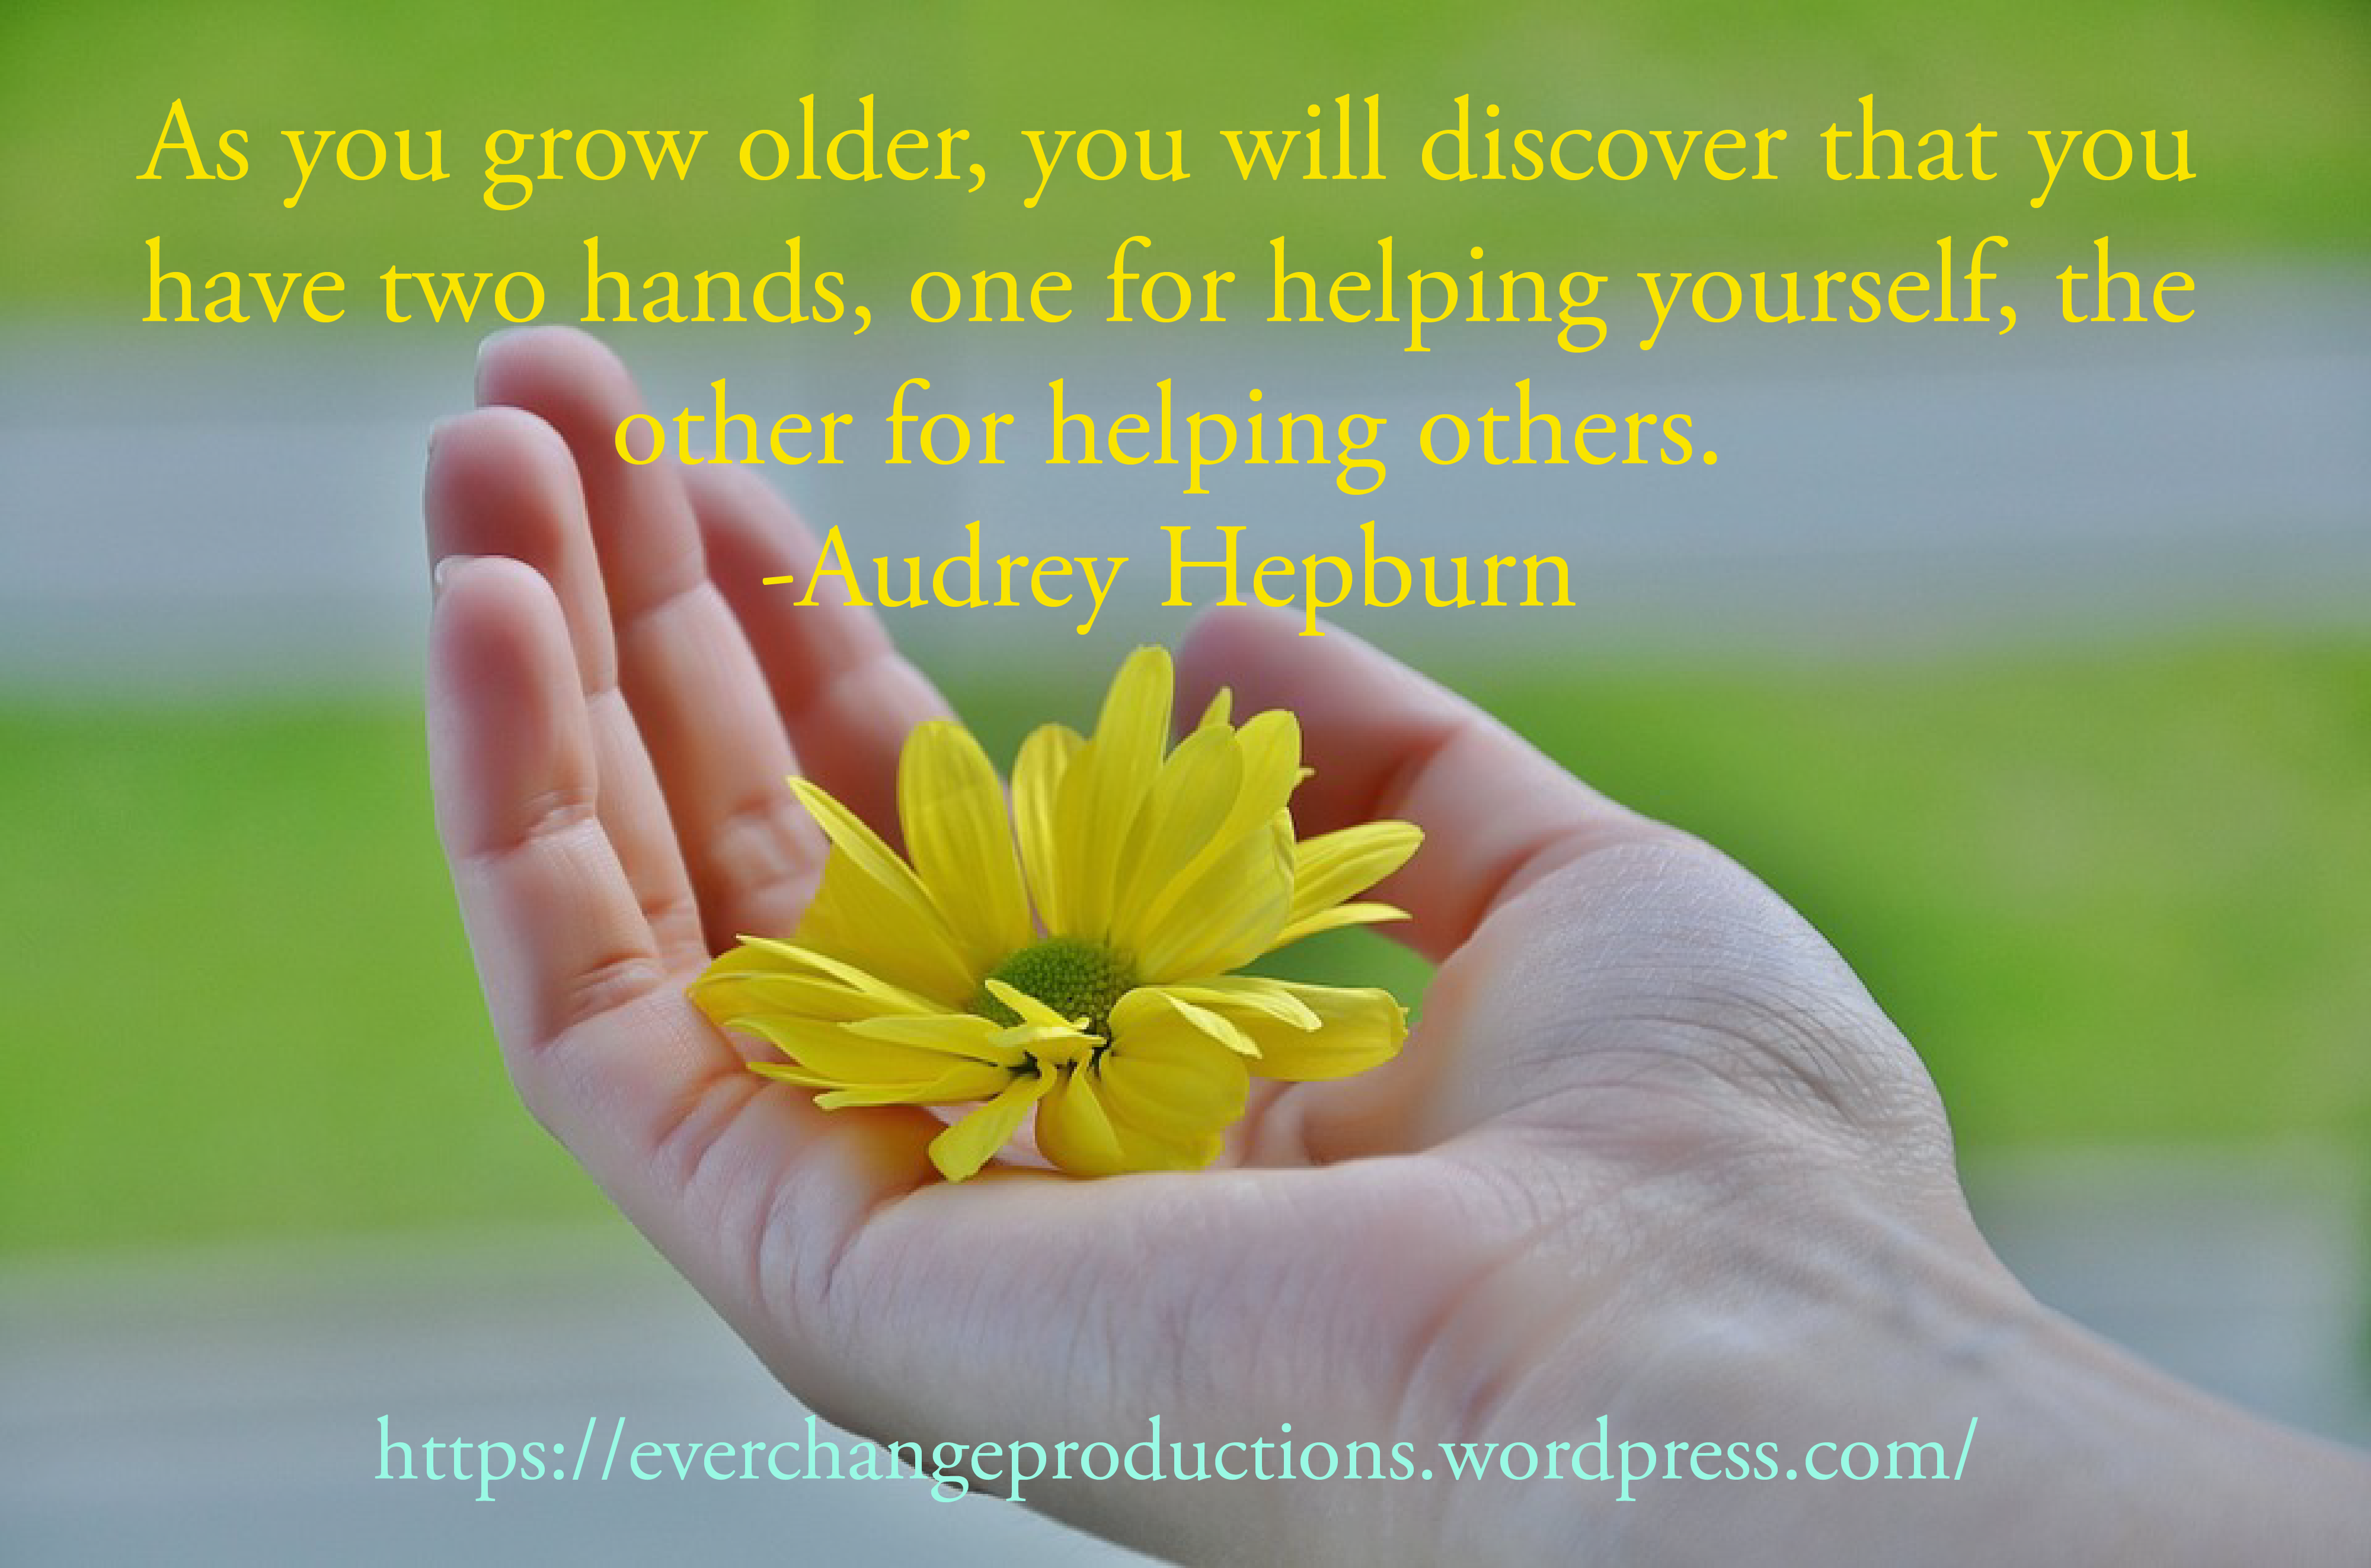 "As you grow older, you will discover that you have two hands, one for helping yourself, the other for helping others." -Audrey Hepburn inspirational quotes